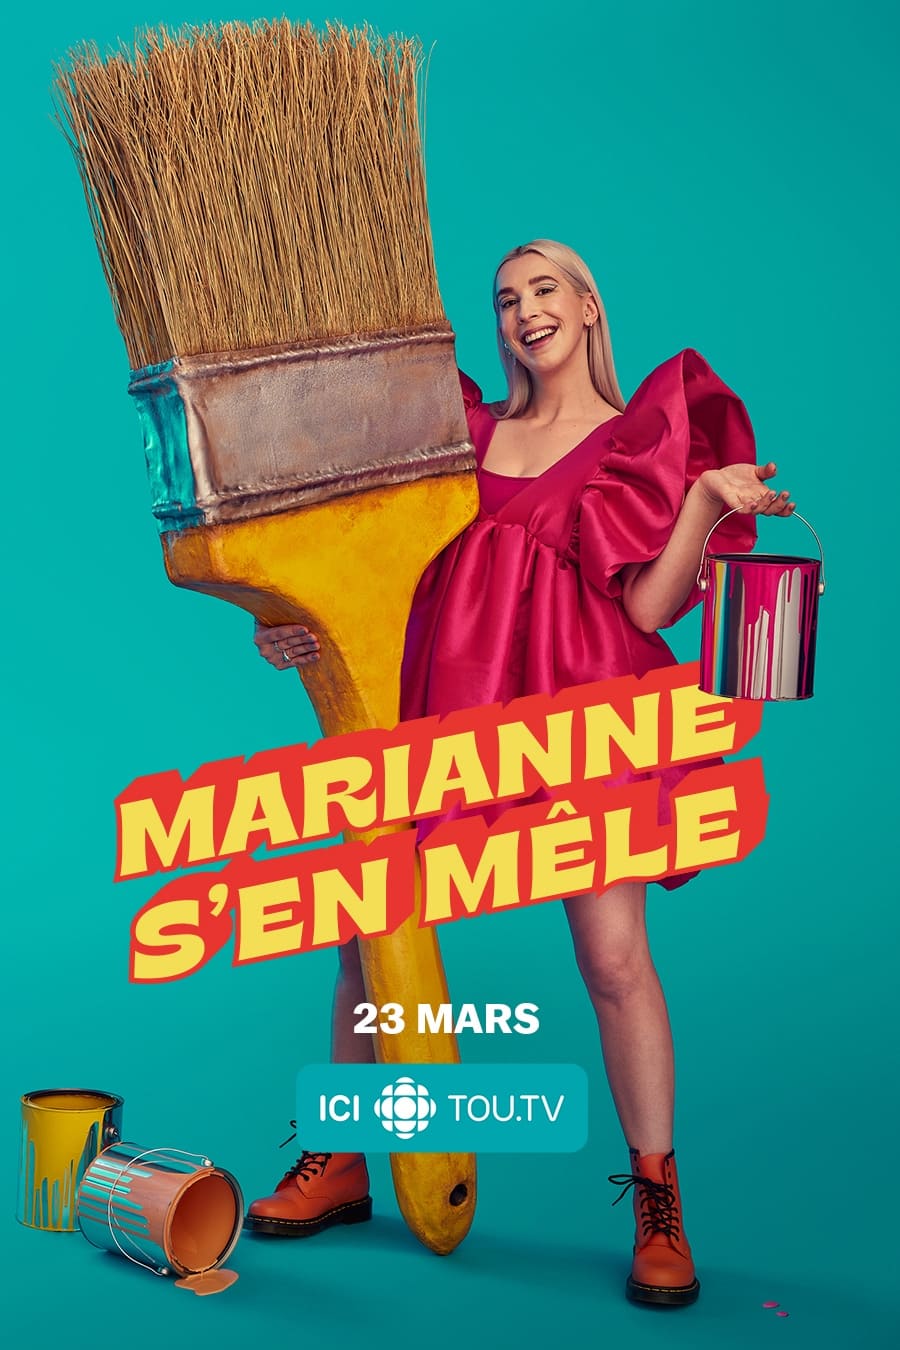 Marianne s'en mêle TV Shows About Teenager